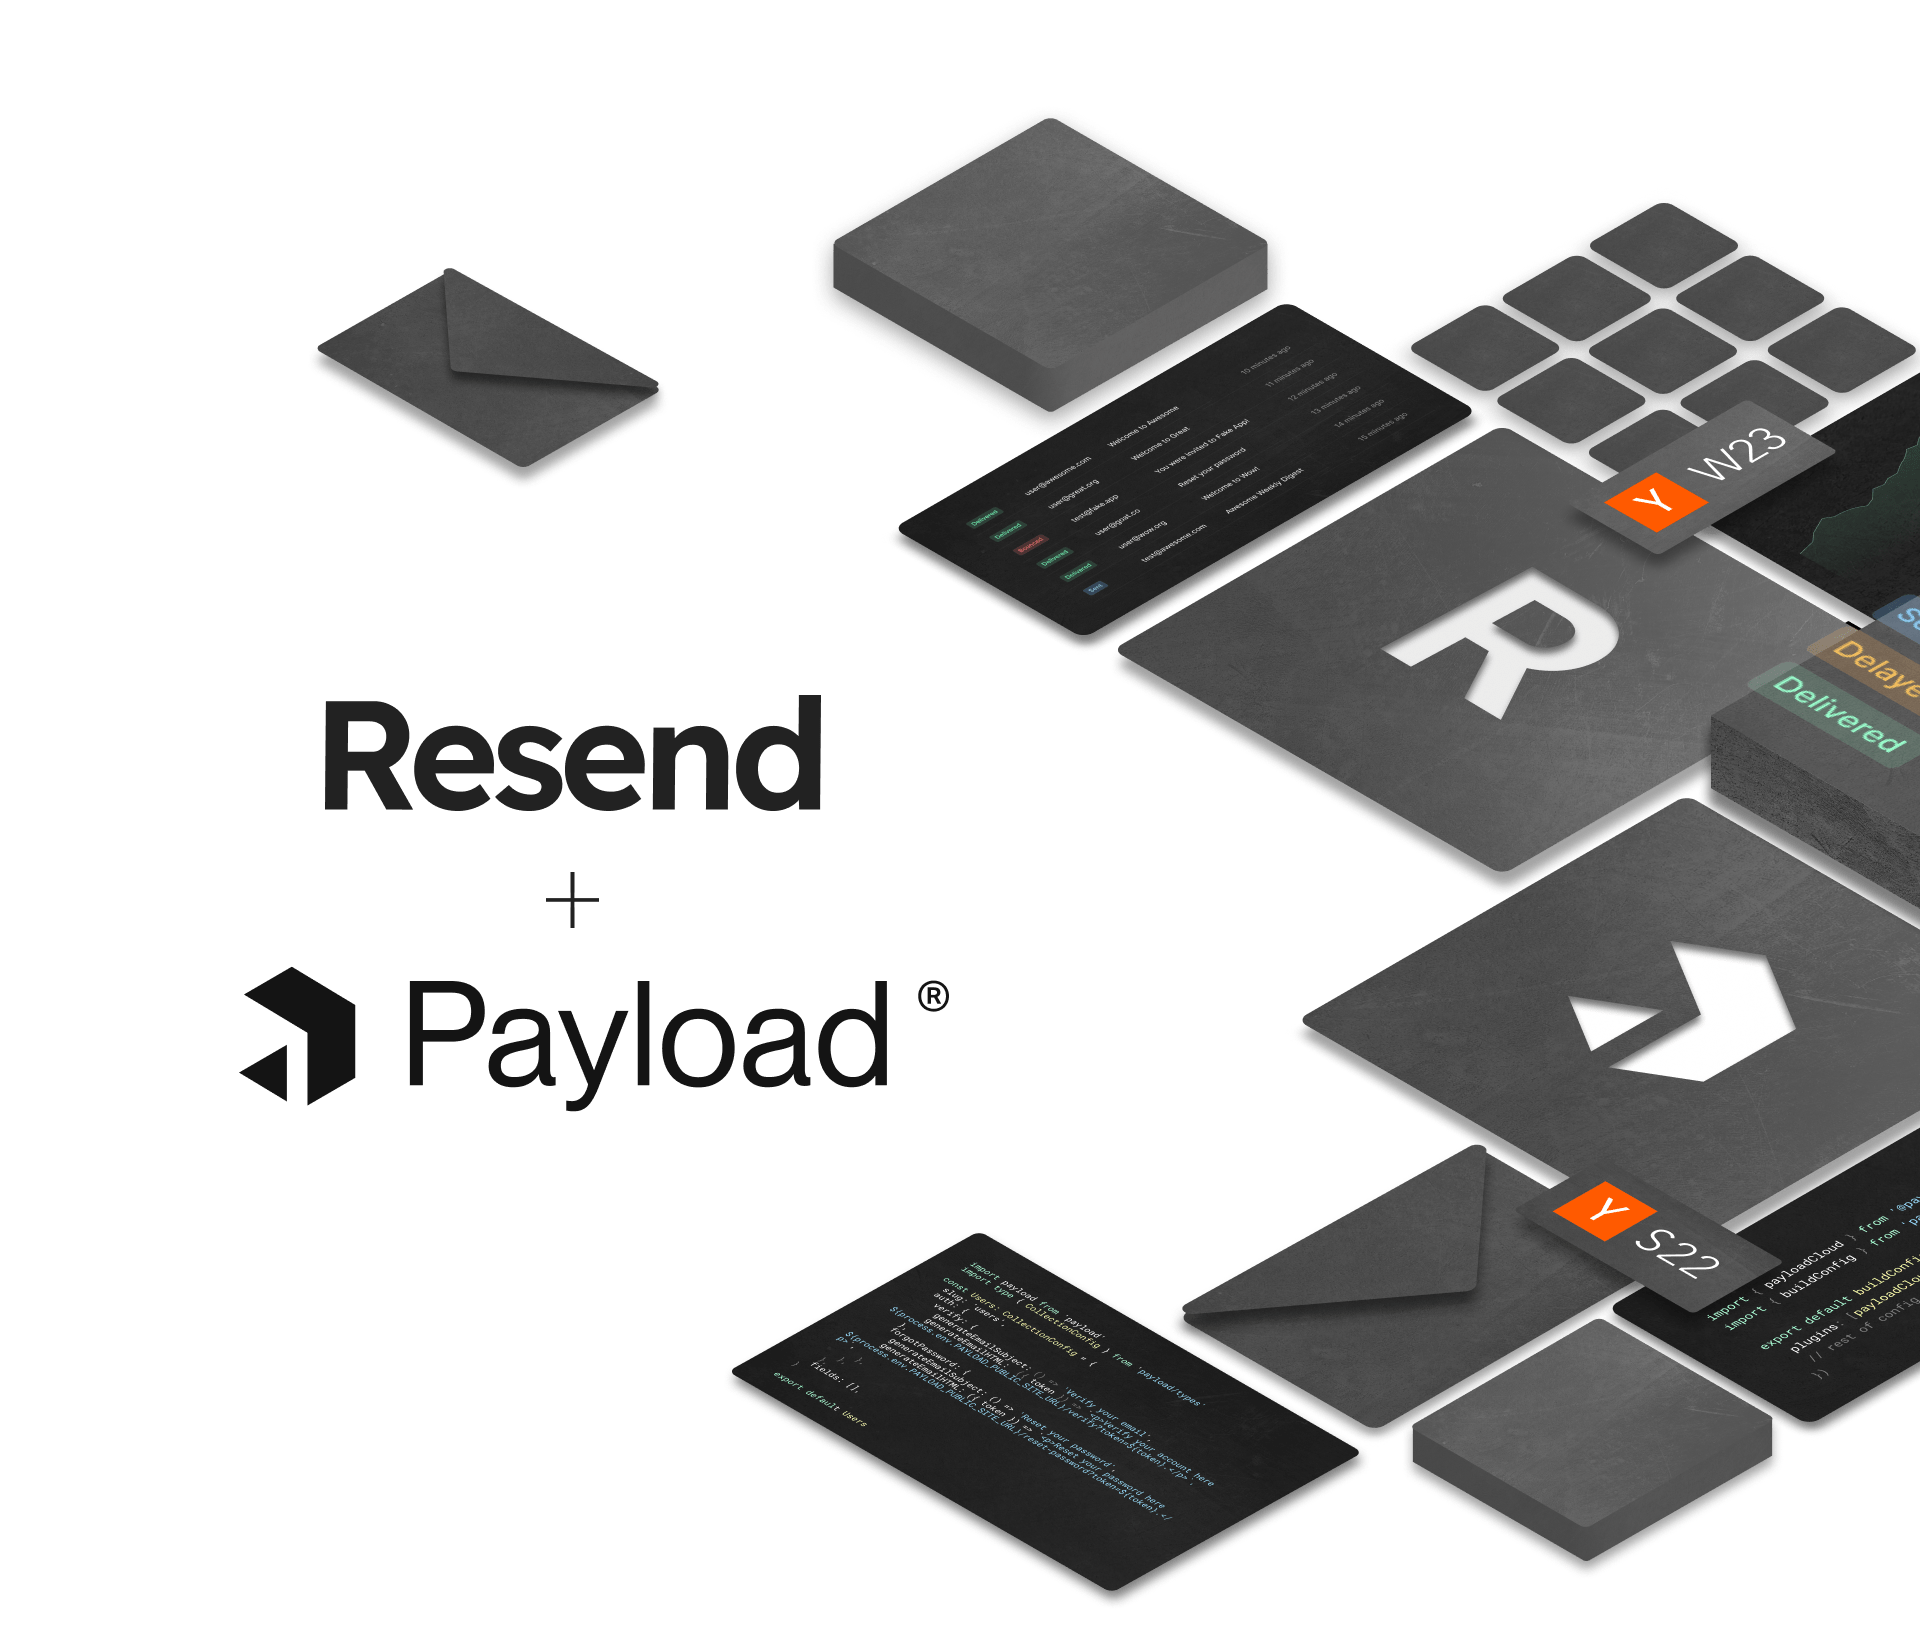 Payload + Resend